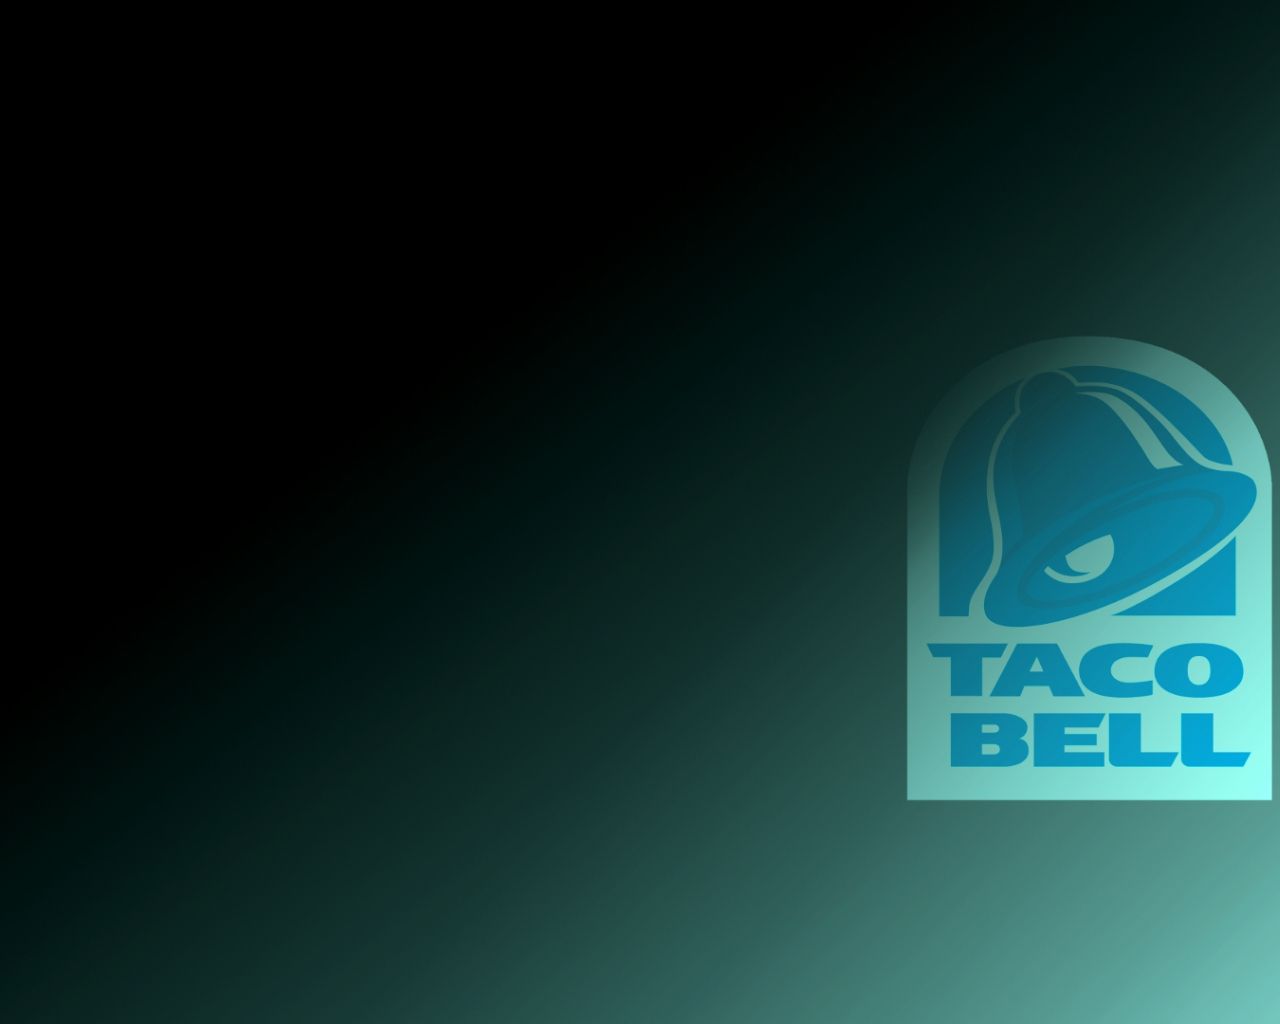 Free download Download the Taco Bell Wallpaper Taco Bell iPhone Wallpaper Taco [1920x1080] for your Desktop, Mobile & Tablet. Explore Taco Wallpaper. Deadpool Nirvana Wallpaper, Taco Bell Wallpaper, Taco Cat Wallpaper